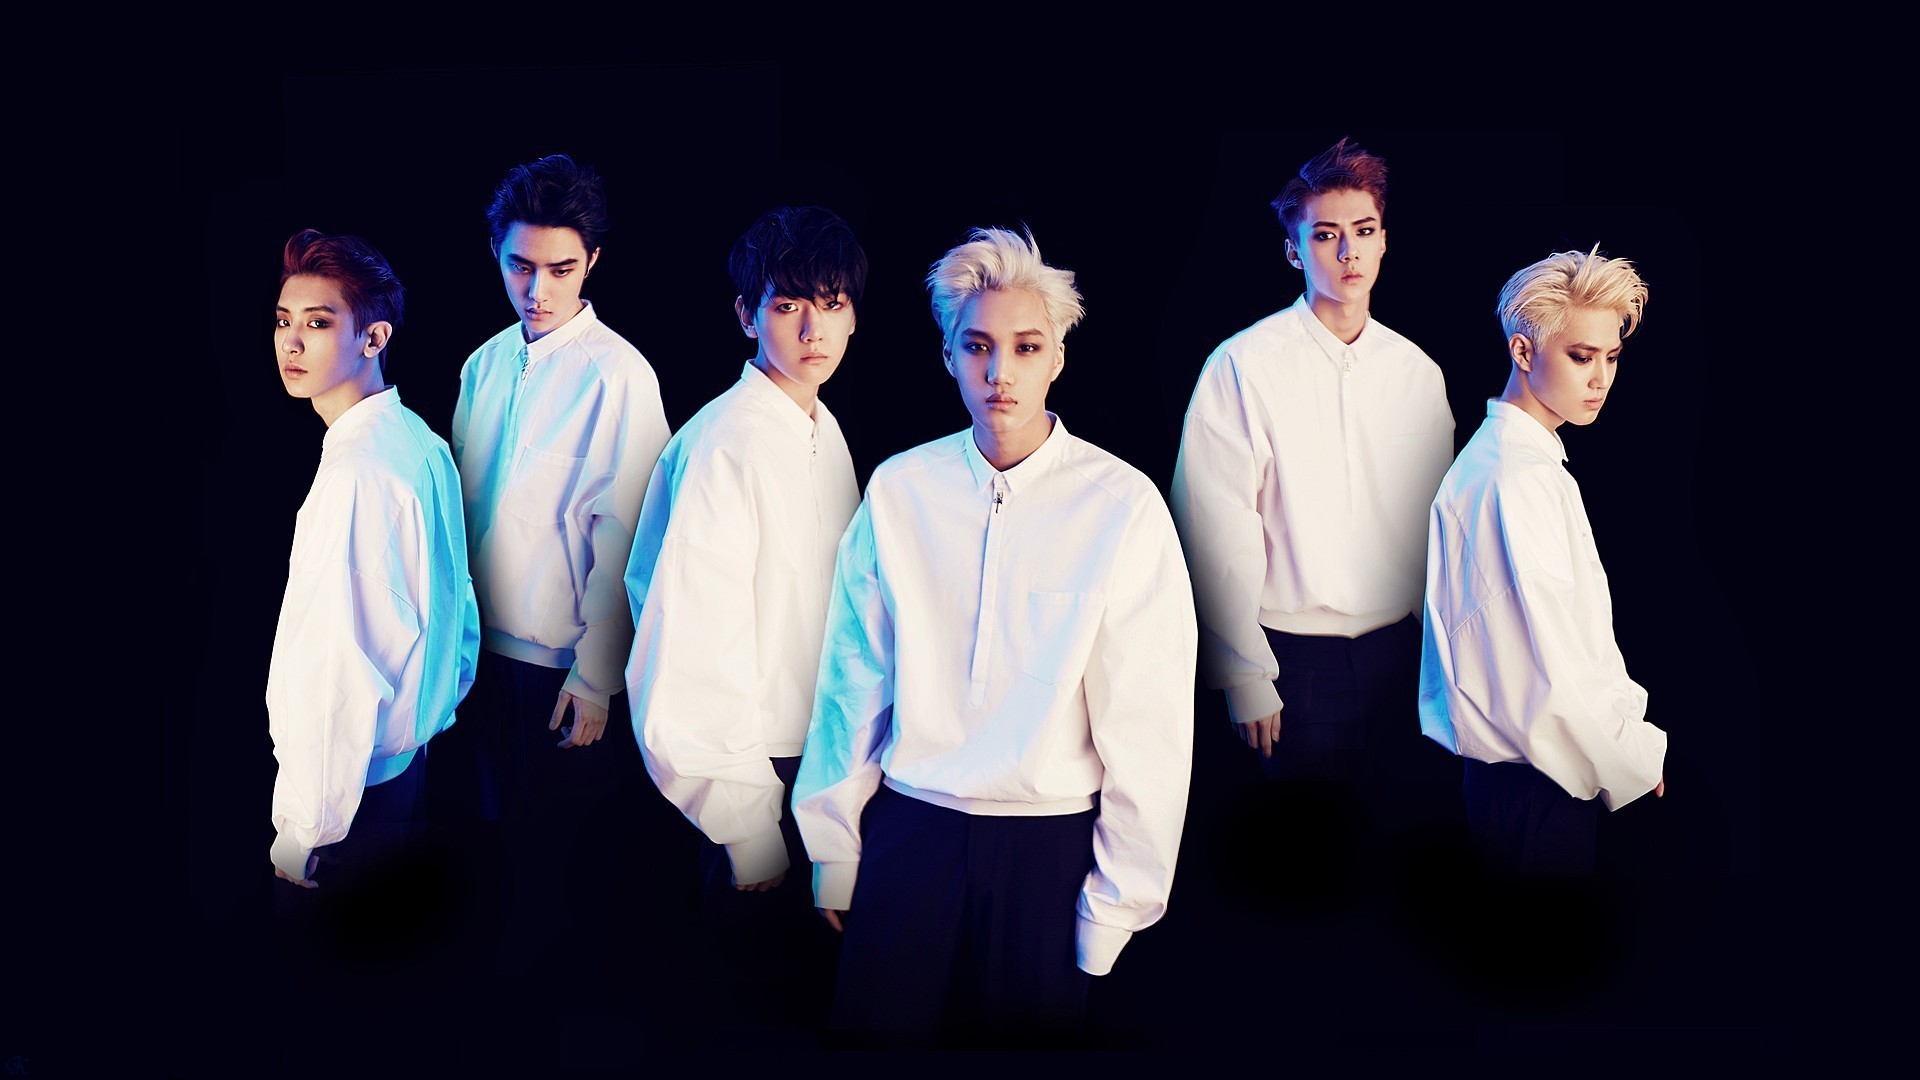 1920x1080 Teaser images for K-pop group EXO's 2014 comeback mini-album. The title  track has been revealed as Overdose. Click pictures for HD.